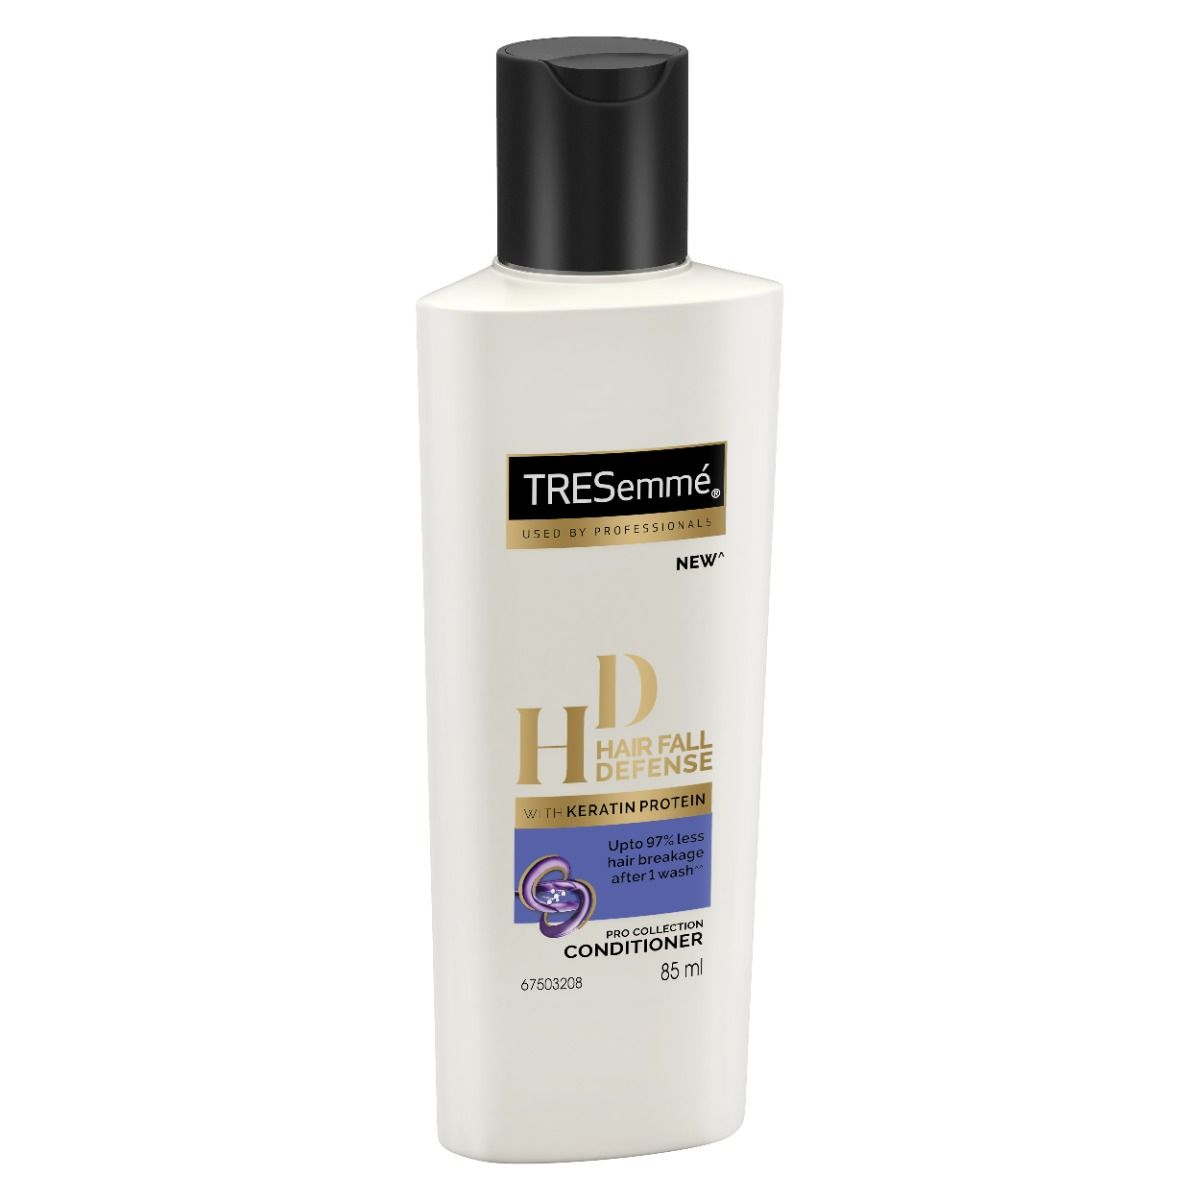 Buy TRESemme Hair Fall Defense Shampoo Online in India  Pixies